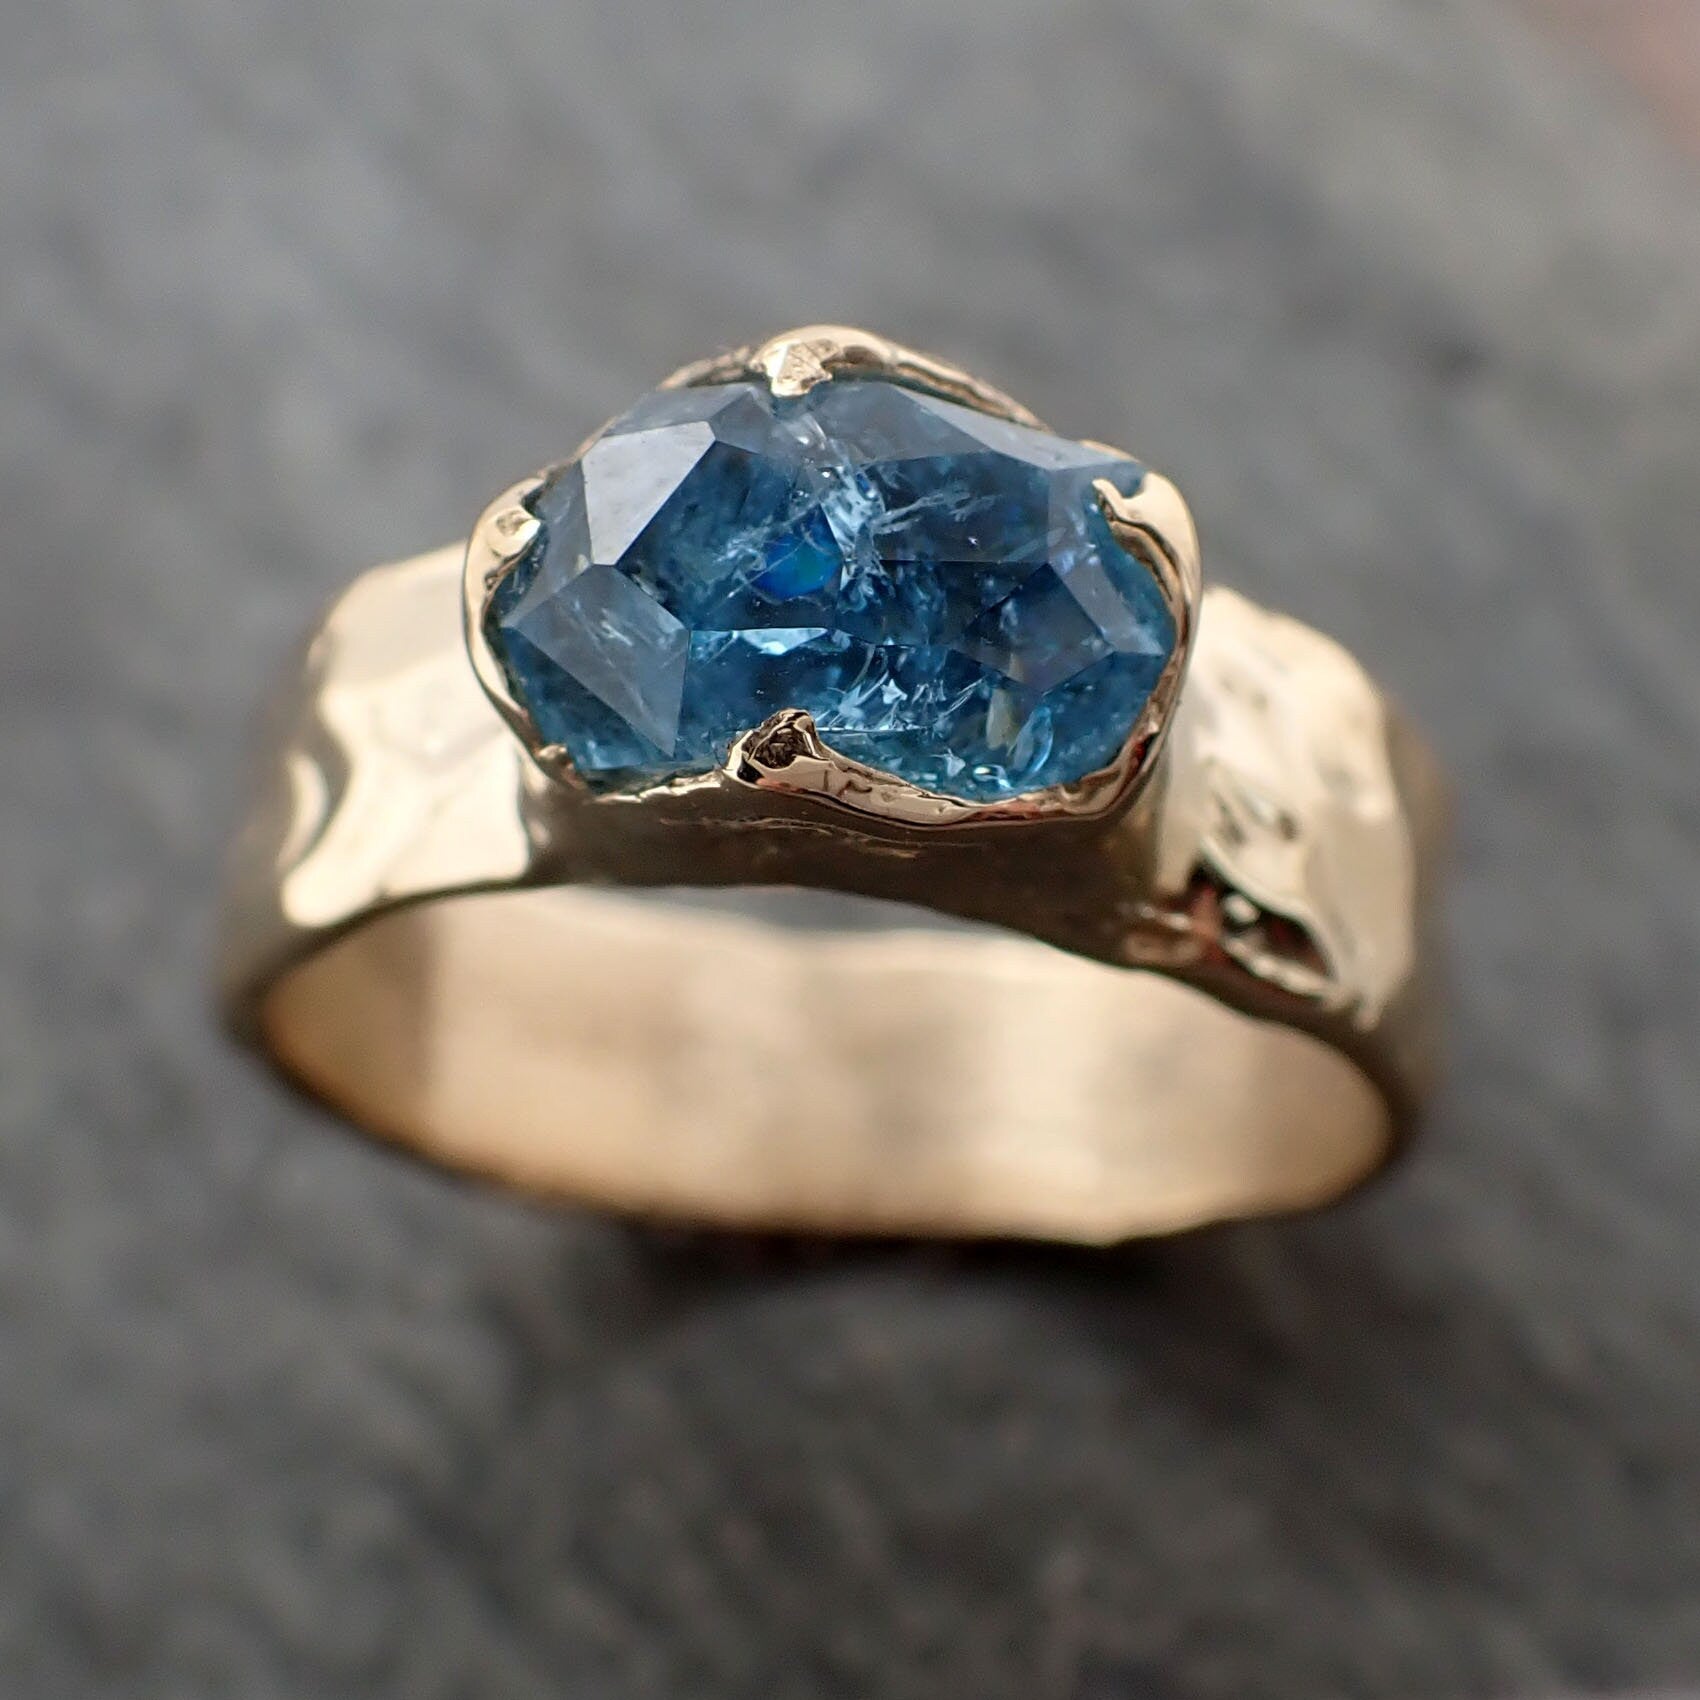 Partially faceted Aquamarine Solitaire Ring Cigar band 14k gold Custom One Of a Kind Gemstone Ring Bespoke byAngeline 3248